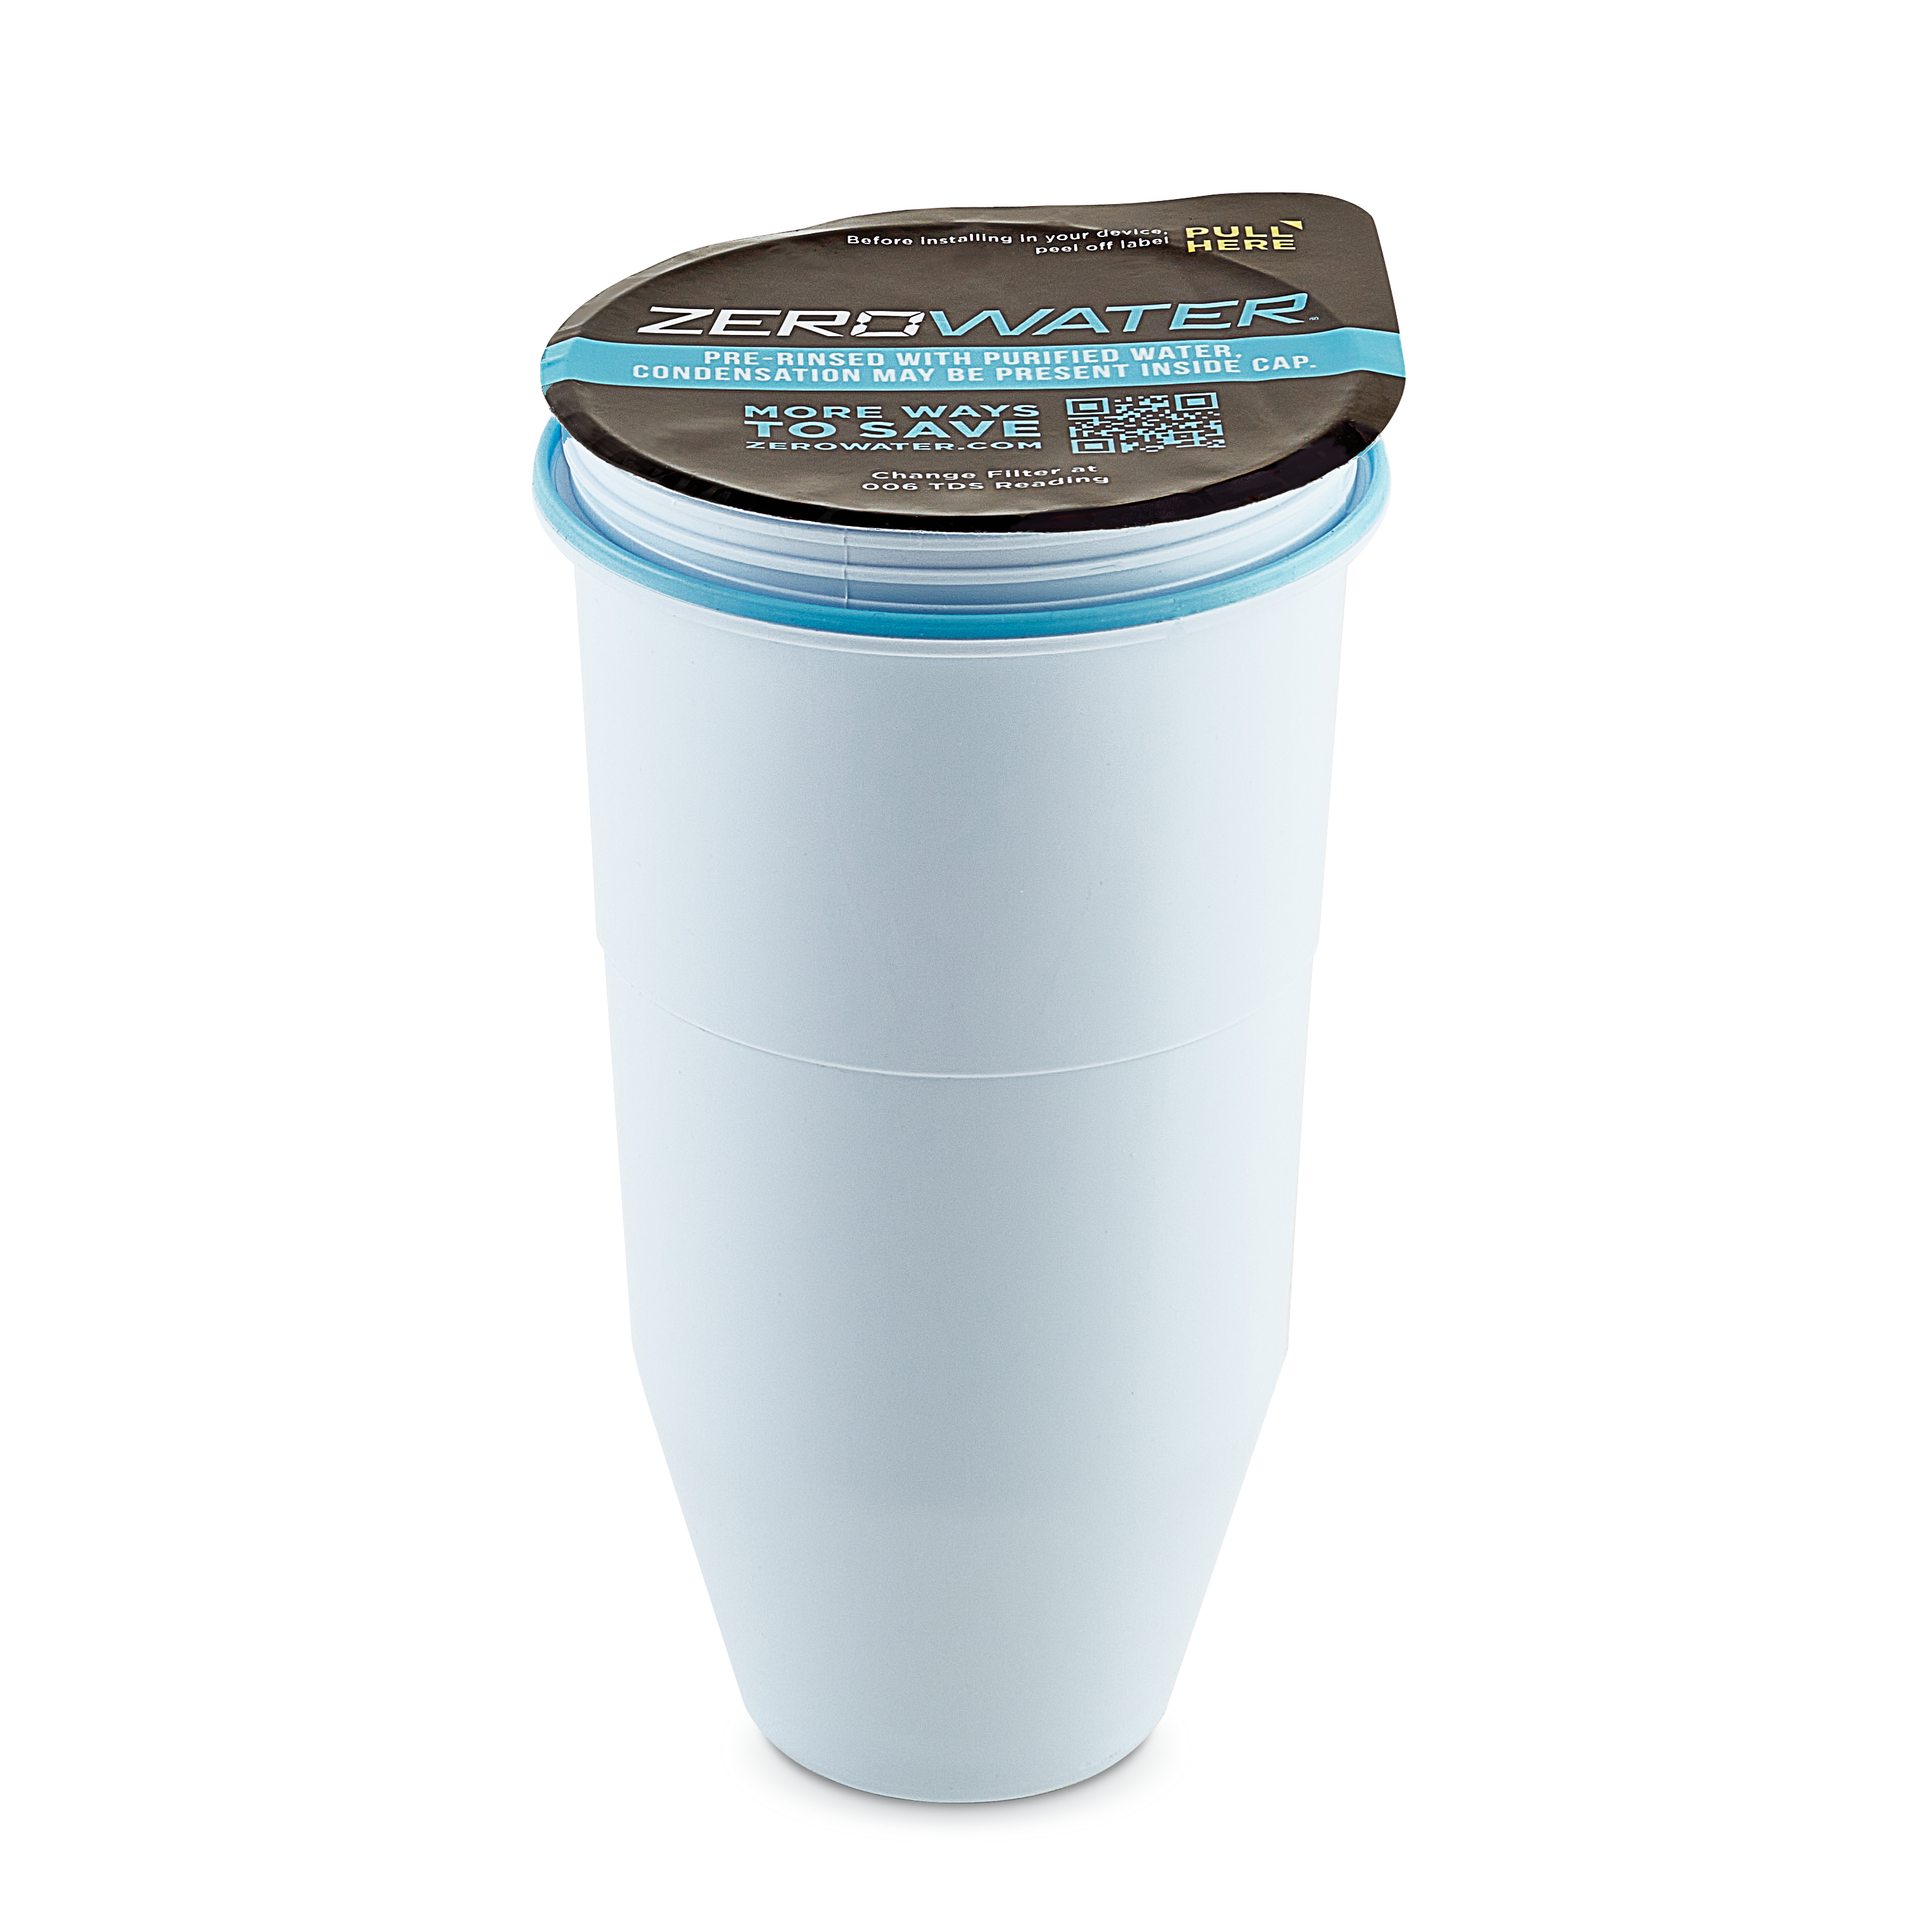 Angle View: Water Filter for Dacor Side-by-Side Refrigeration - White